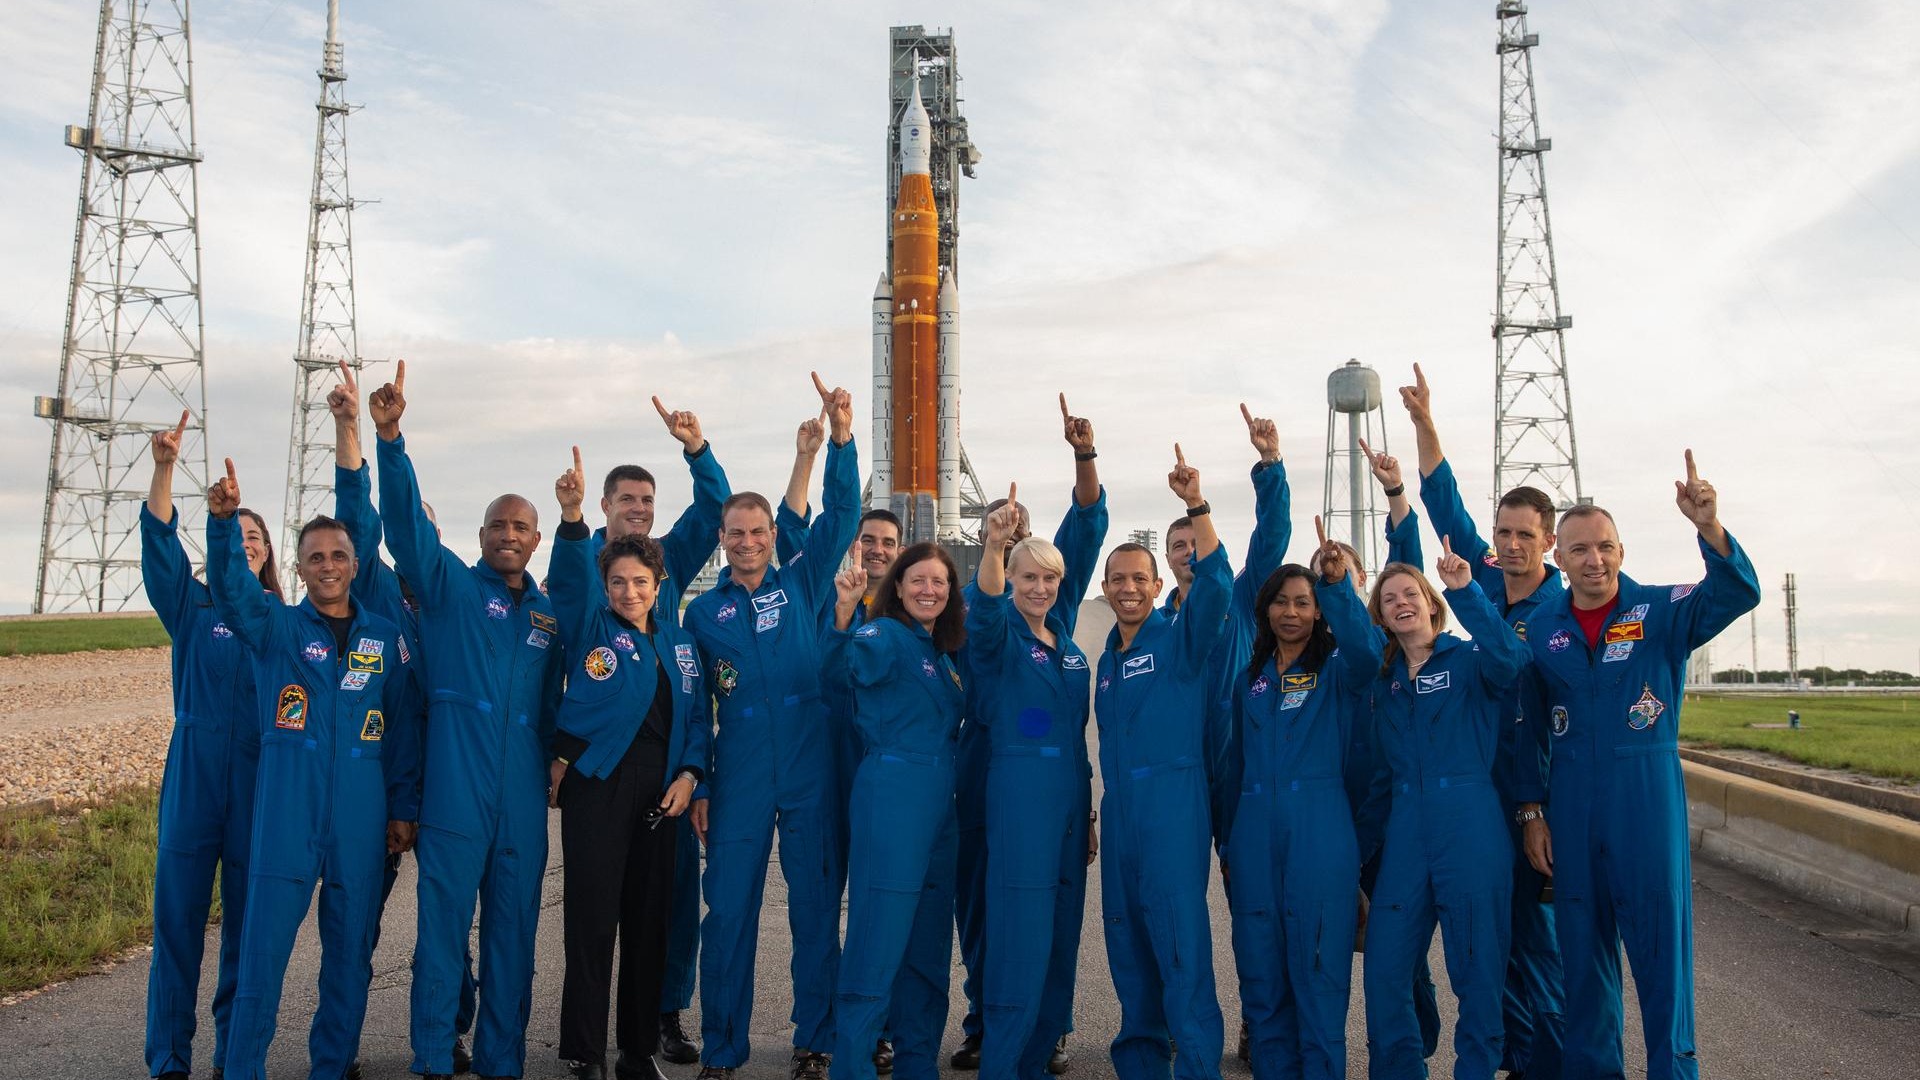 New NASA astronauts celebrate moon missions, private space stations as they get ready for liftoff (exclusive)